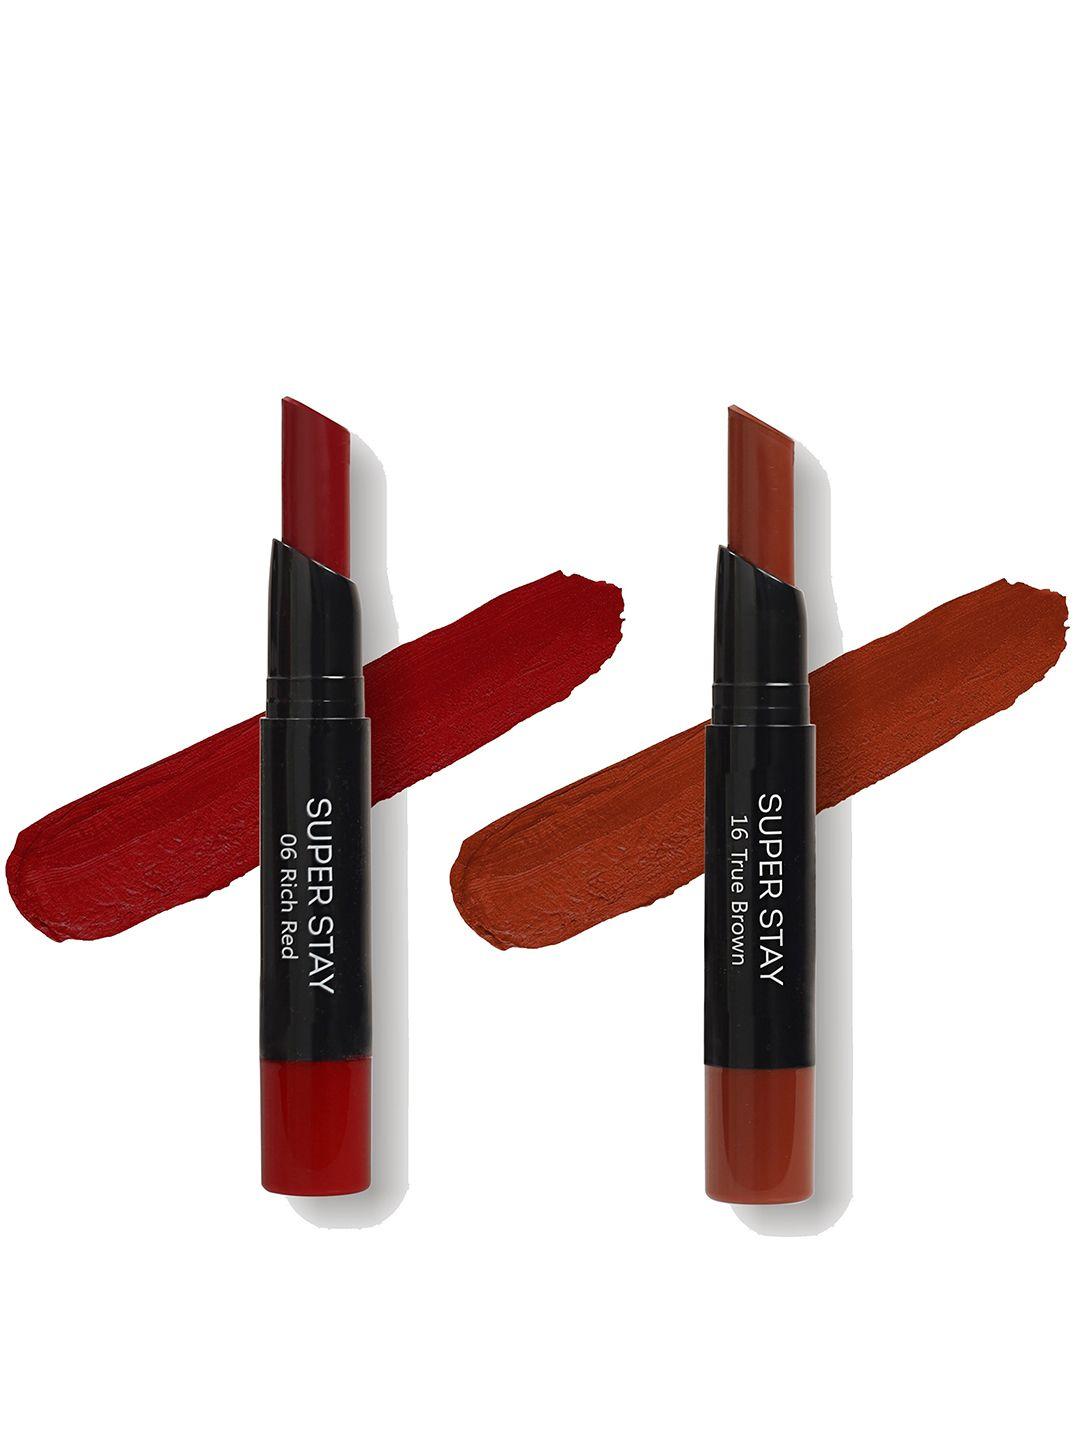 me-on set of 2 super stay kissproof lipstick 2 g (each)-rich red 06-true brown16